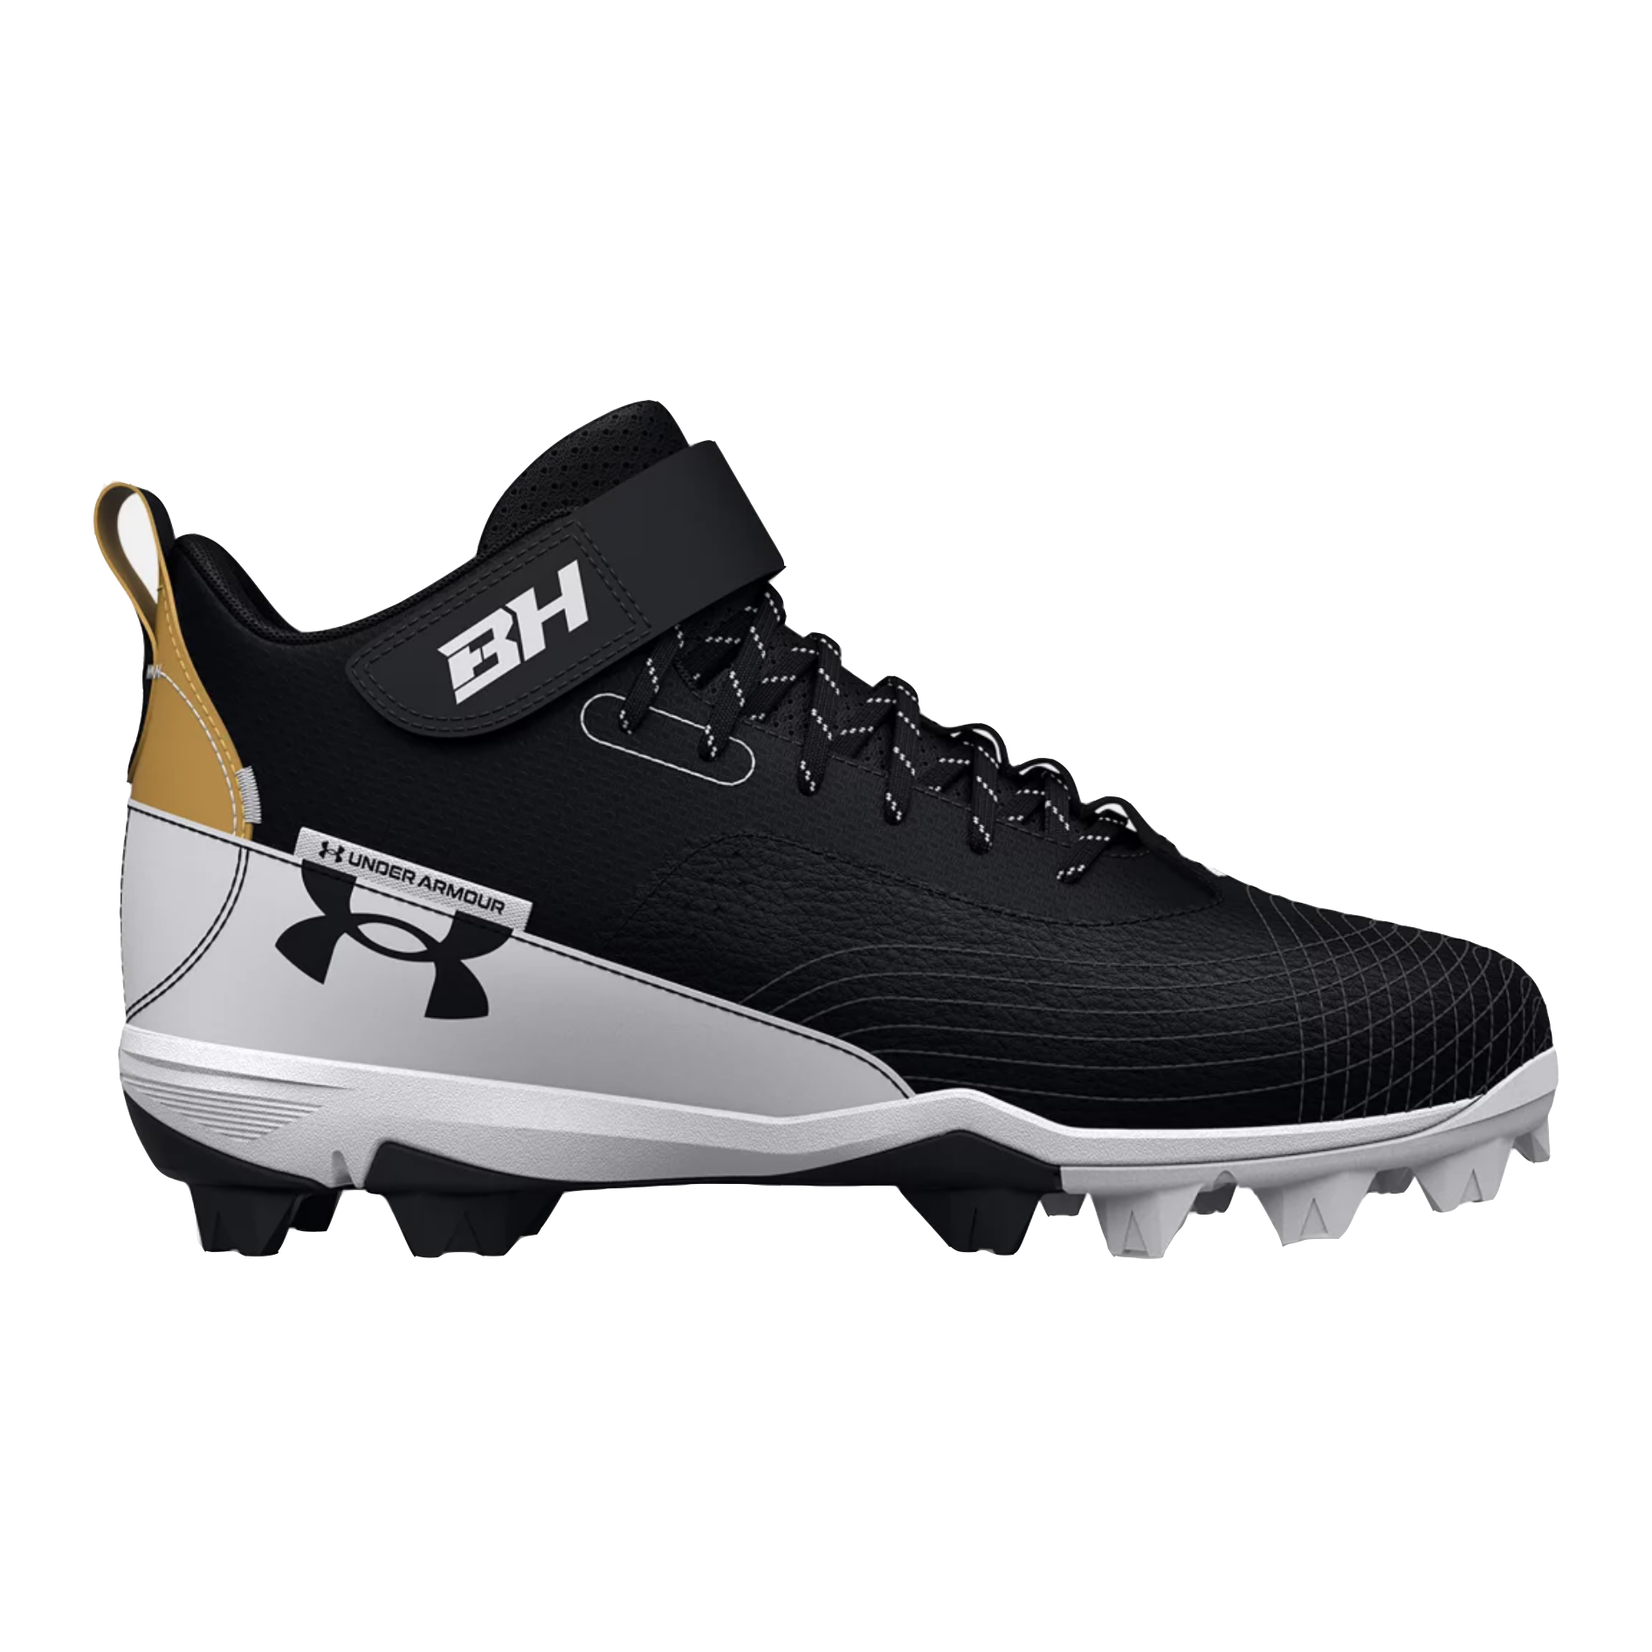 Under Armour S22 Harper 7 Mid RM Cleats (Black)